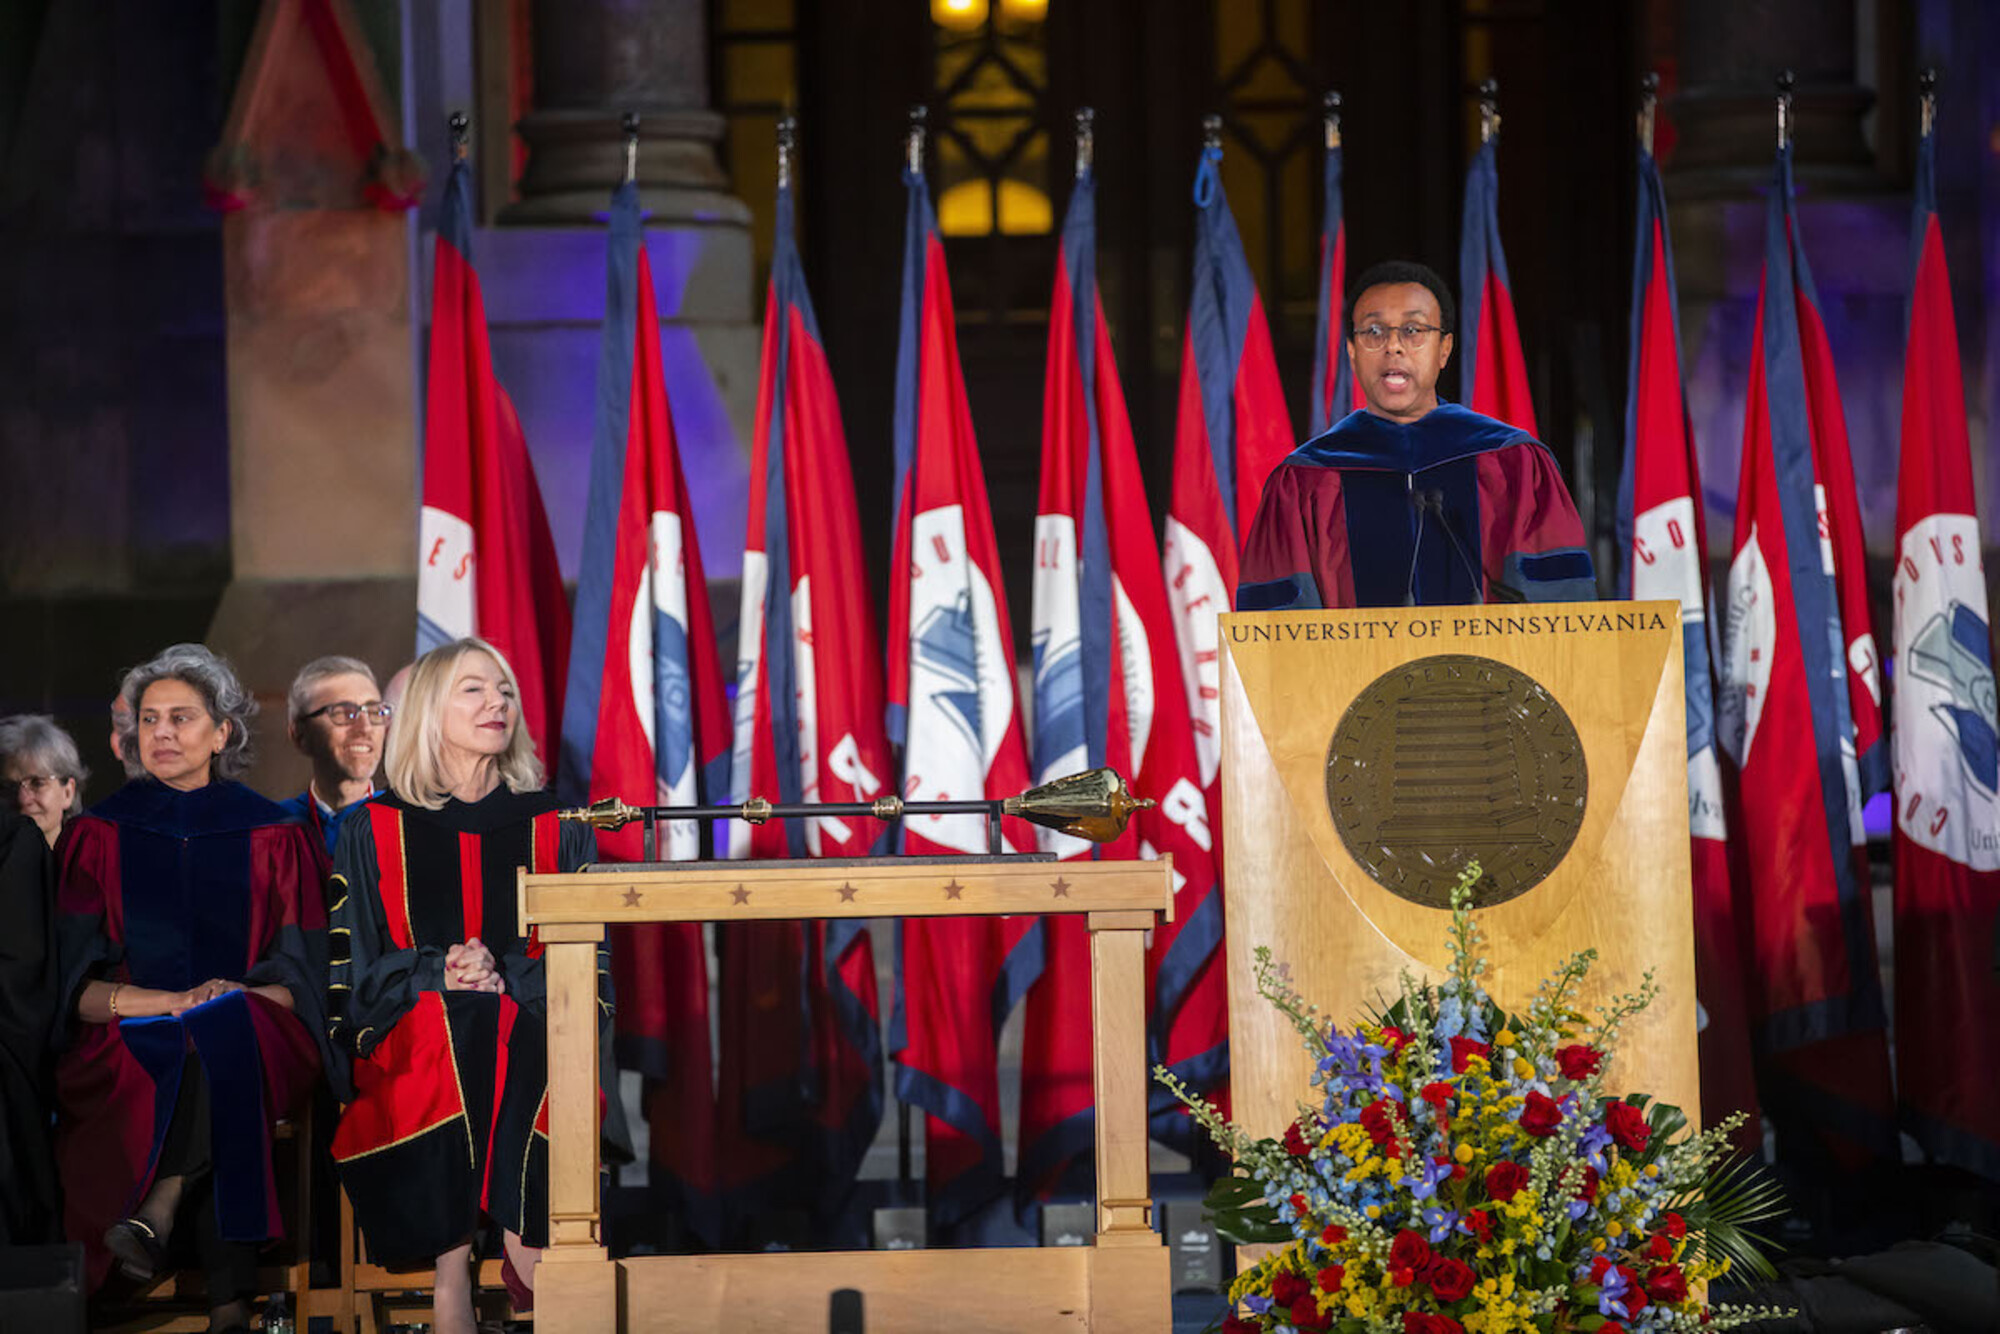 Penn Provost Wendell Pritchett speaks at the podium during convocation with Amy Gutmann and others seated to his right